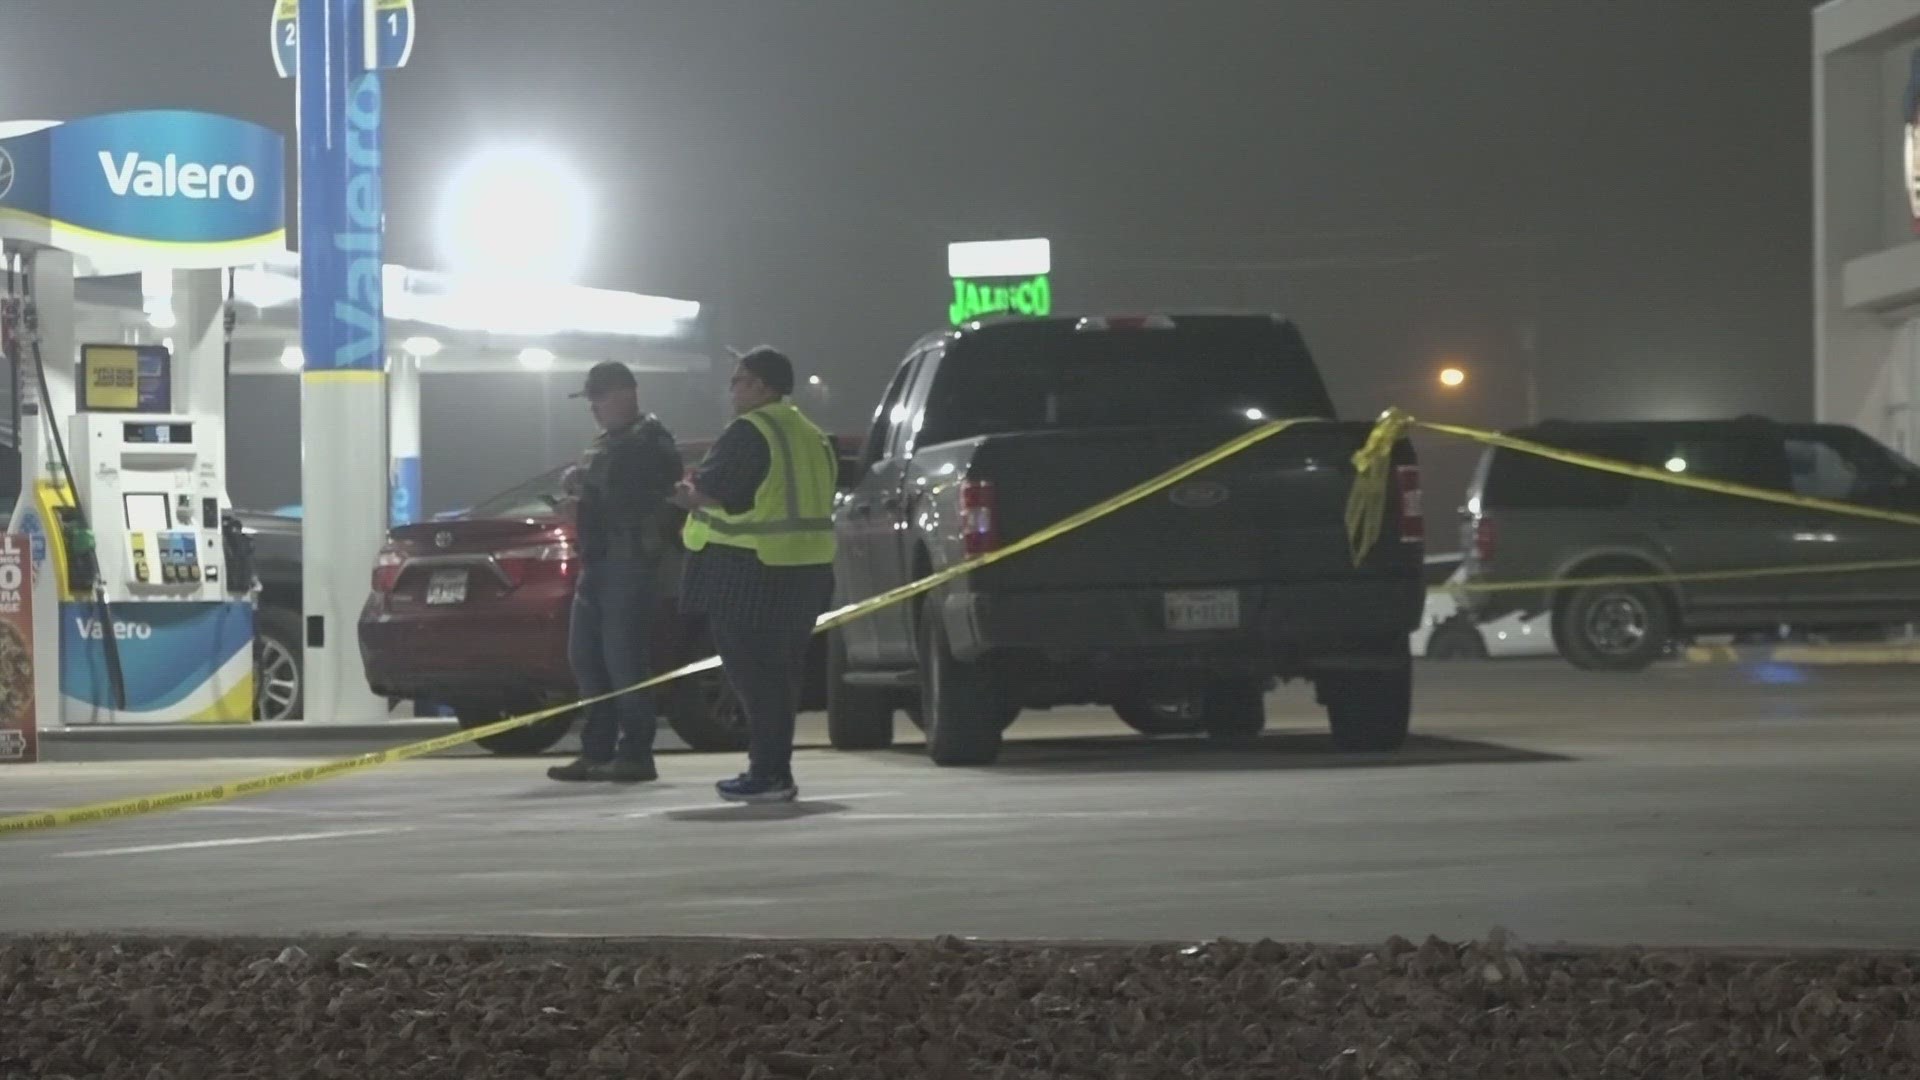 Authorities say Romeo Nance shot himself after he was confronted by police at a gas station in Natalia, Texas.